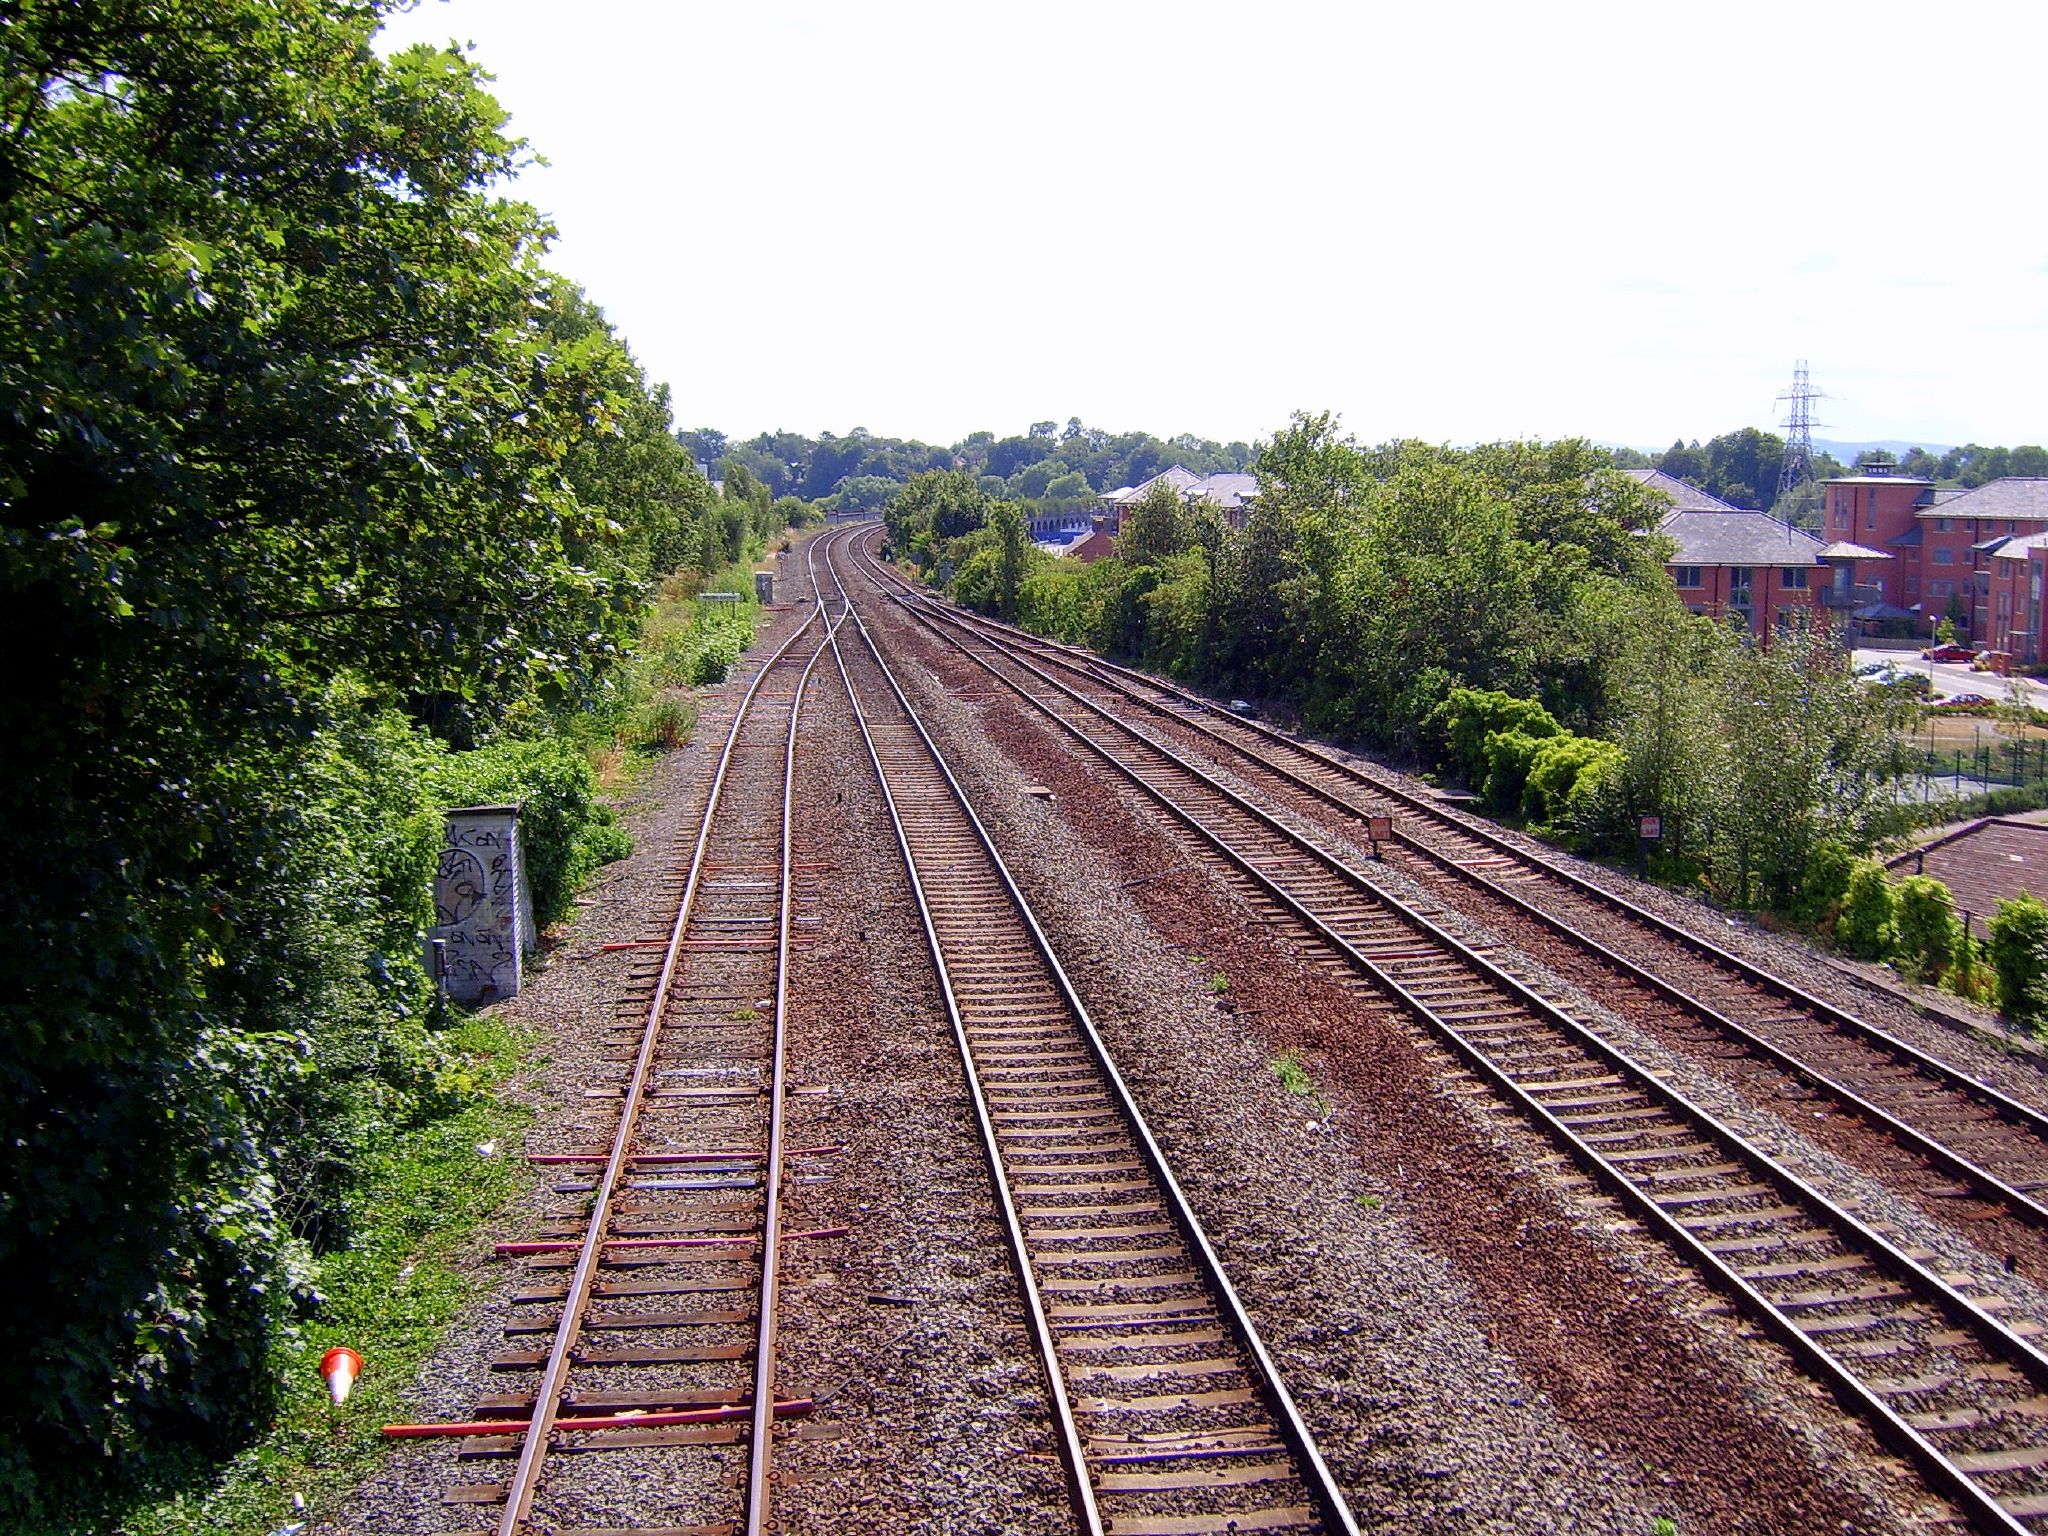 several railroad tracks running between a wooded area